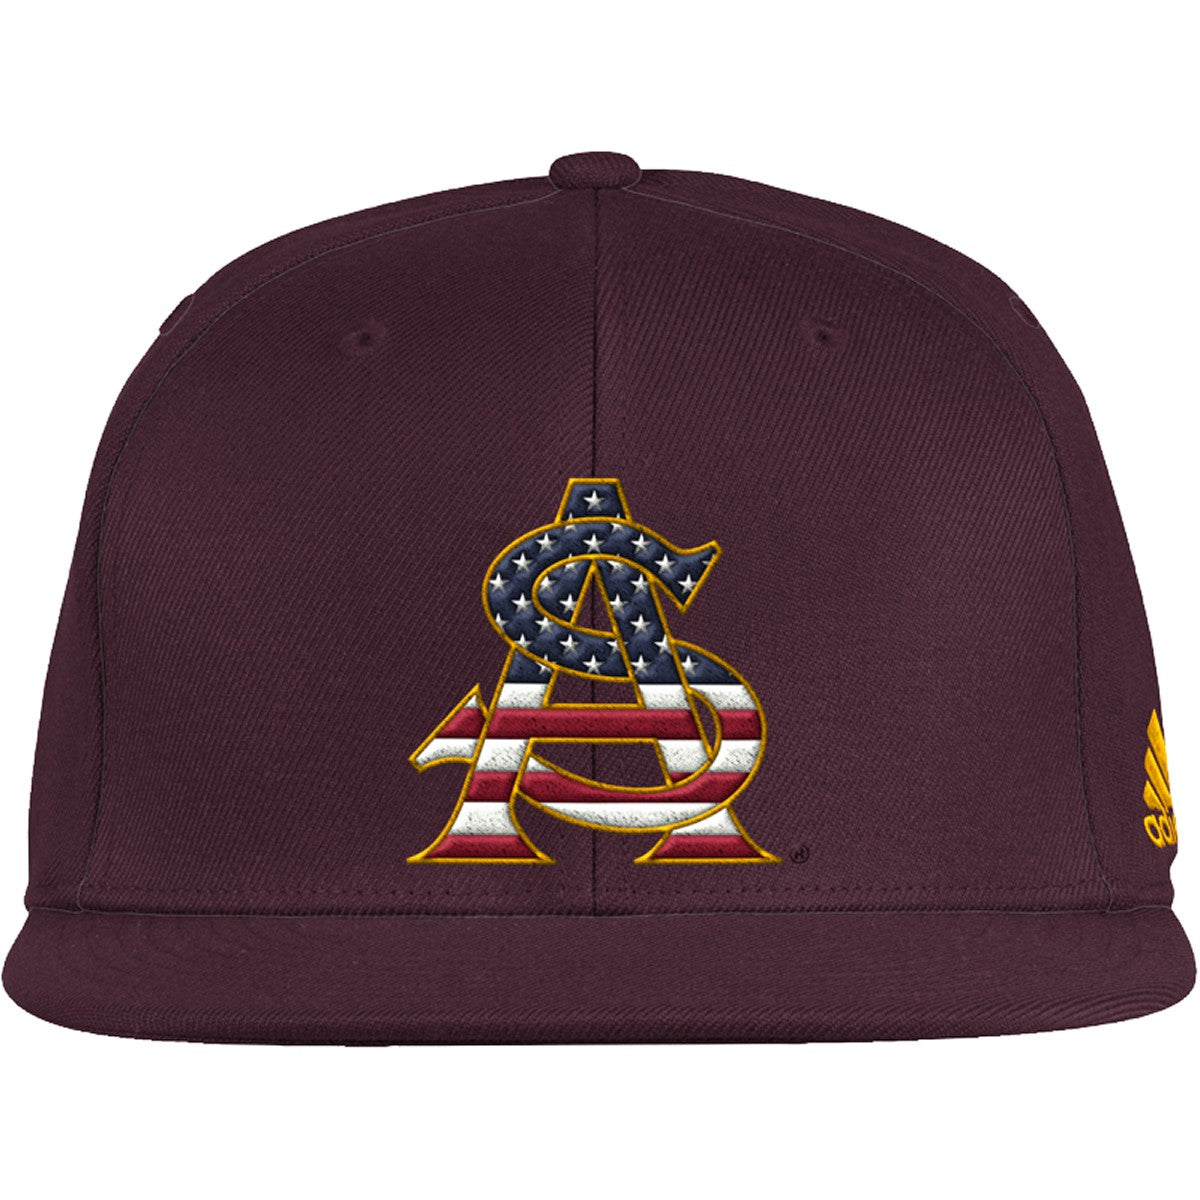 Front view of ASU maroon fitted hat with interlocking 'A' and 'S' with an American flag design inside letters